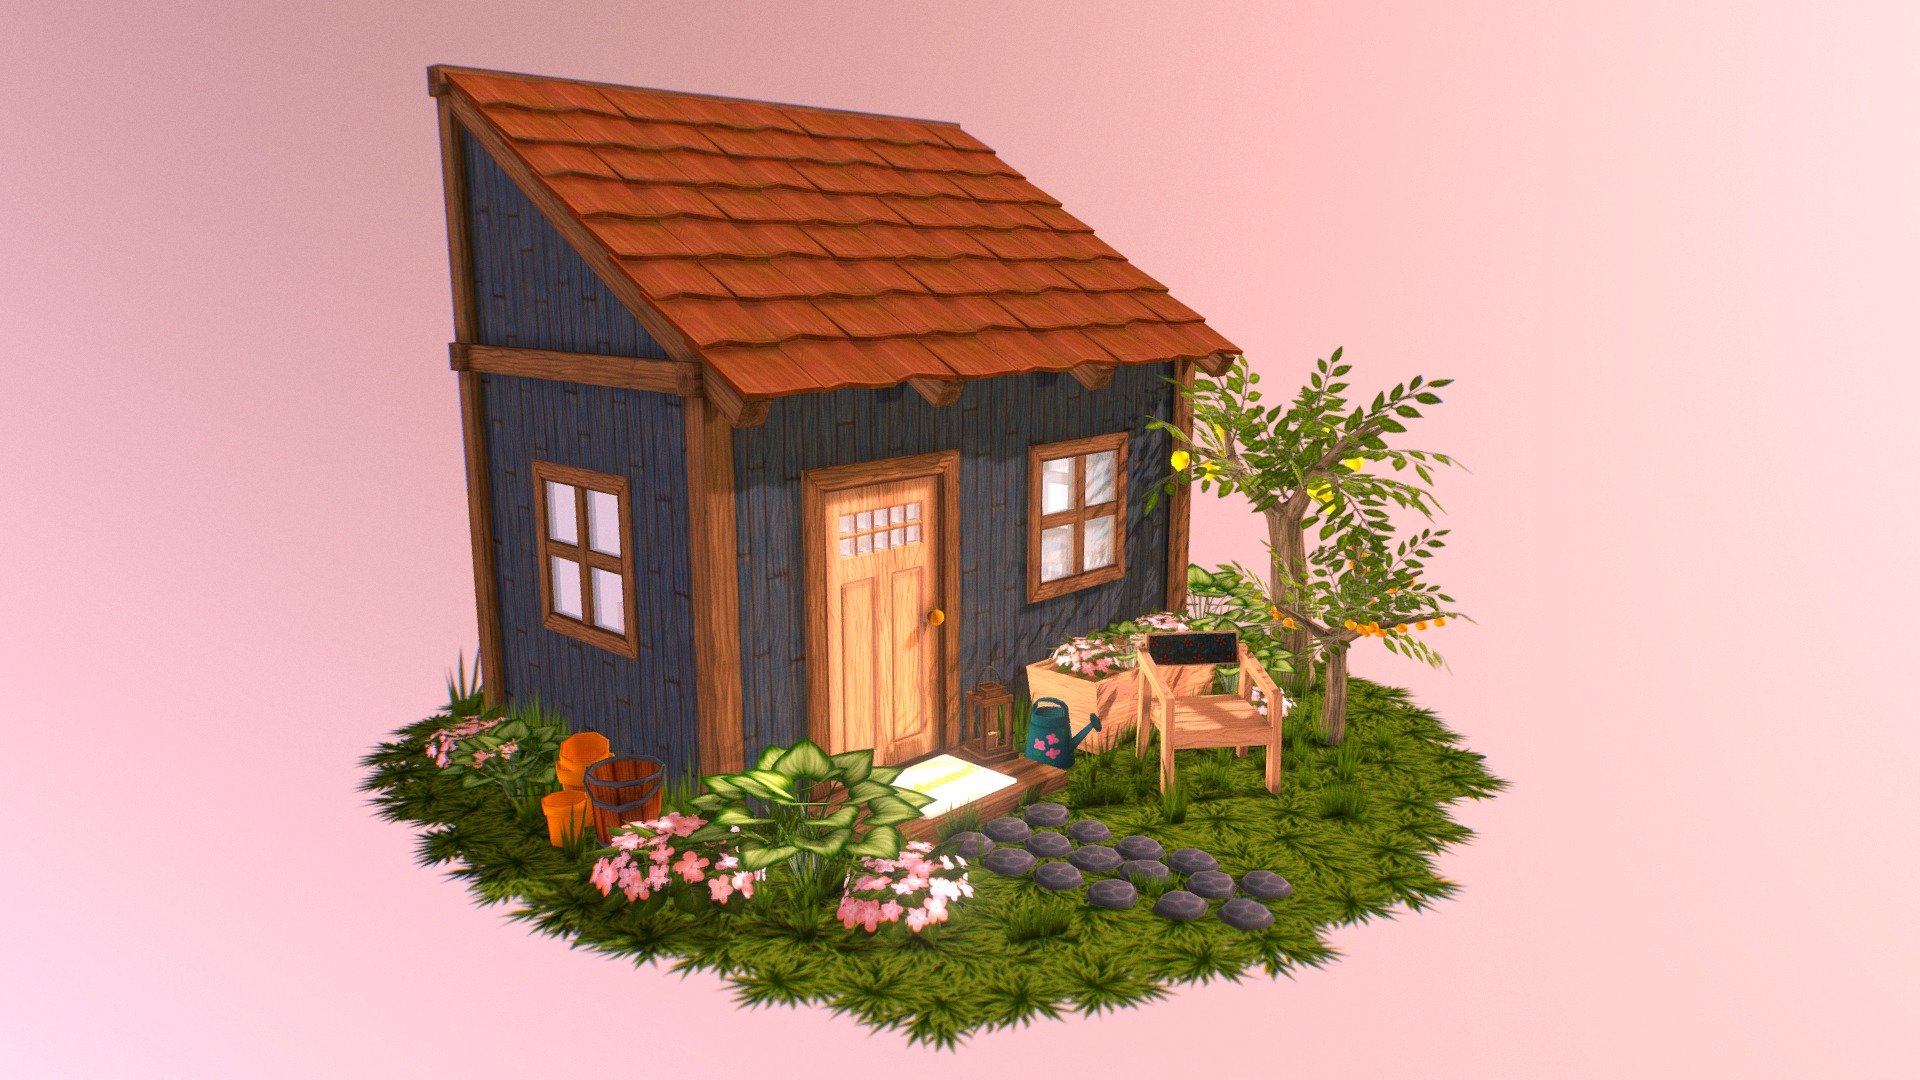 Cozy tiny house I created as a personal project. Made in Blender, textures are painted in Photoshop and Krita 3d model